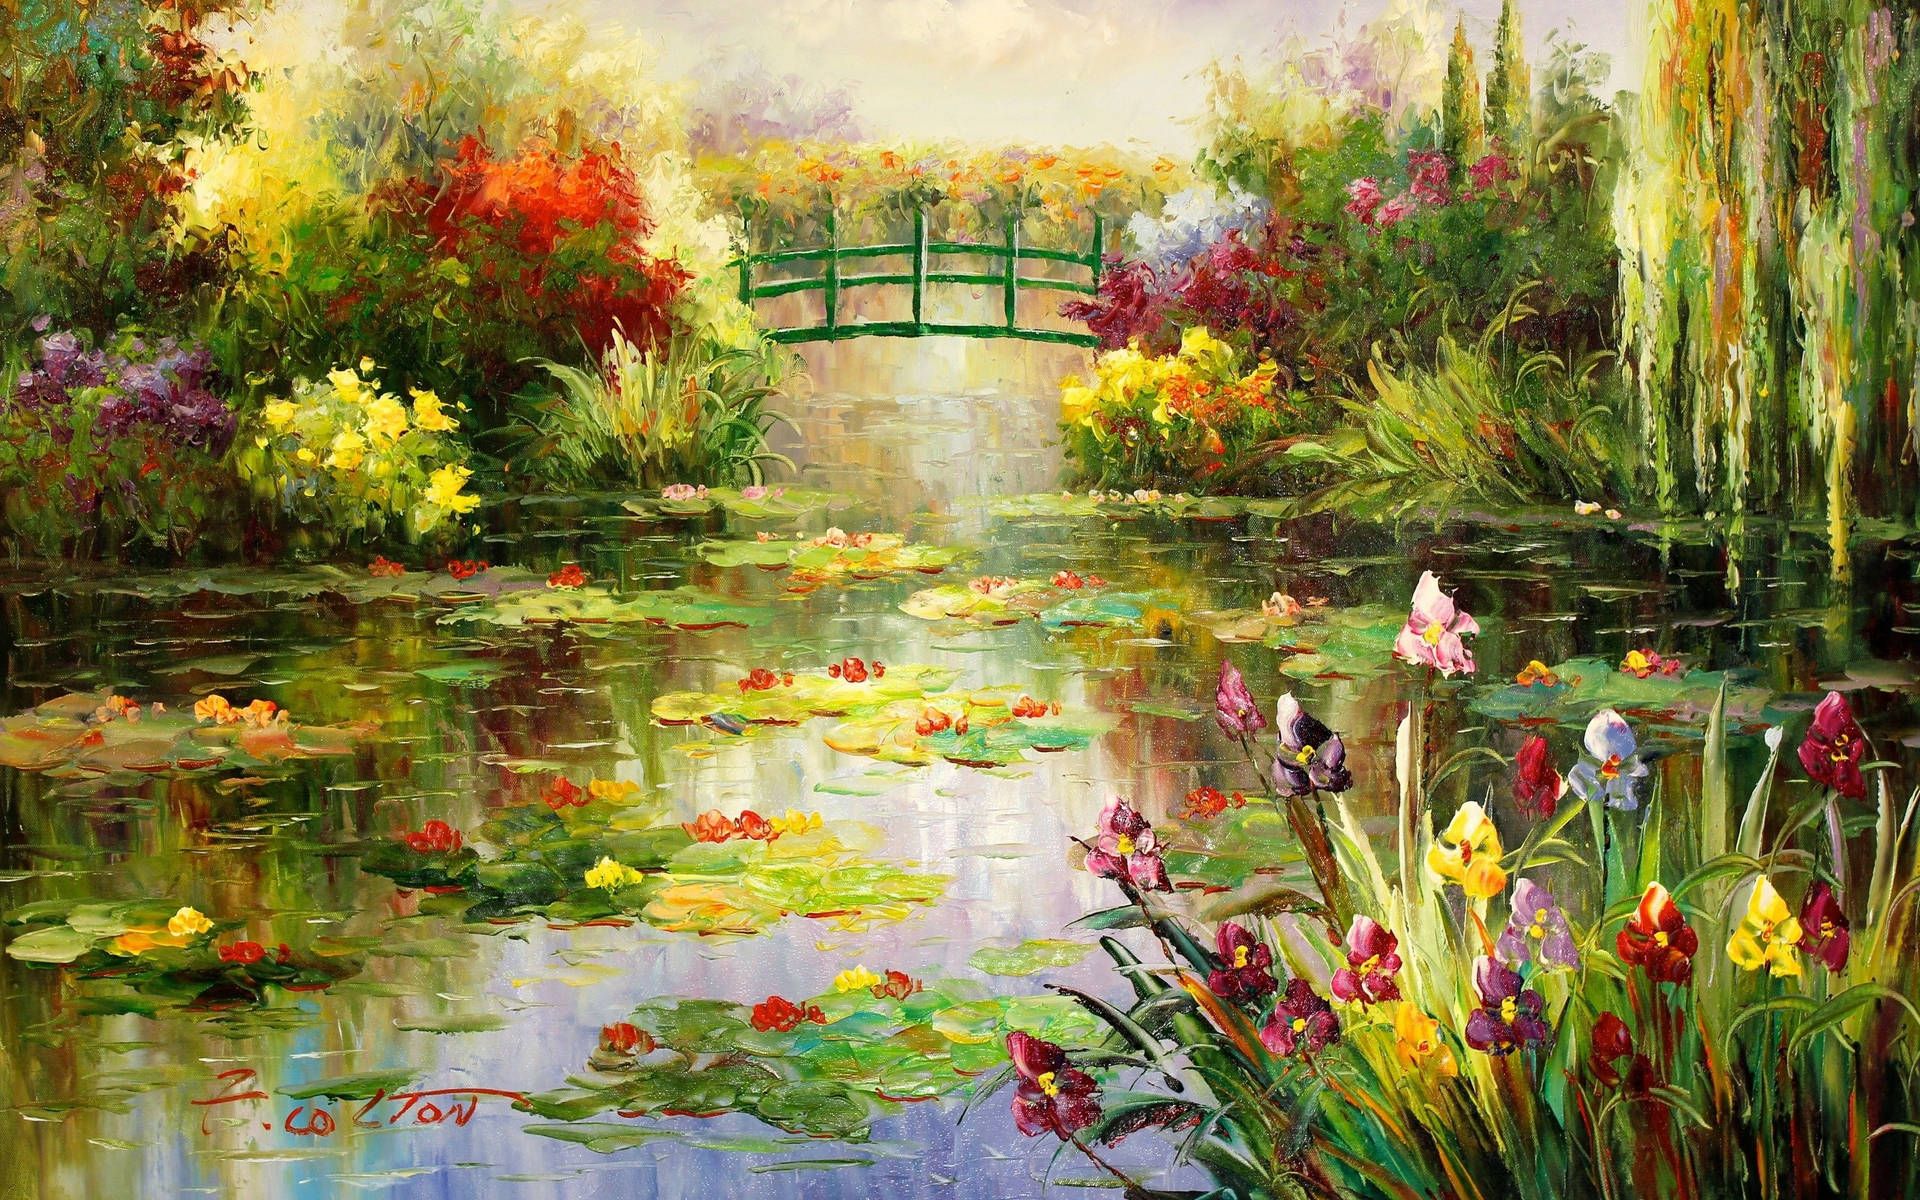 A painting of a pond with a bridge in the background - Art